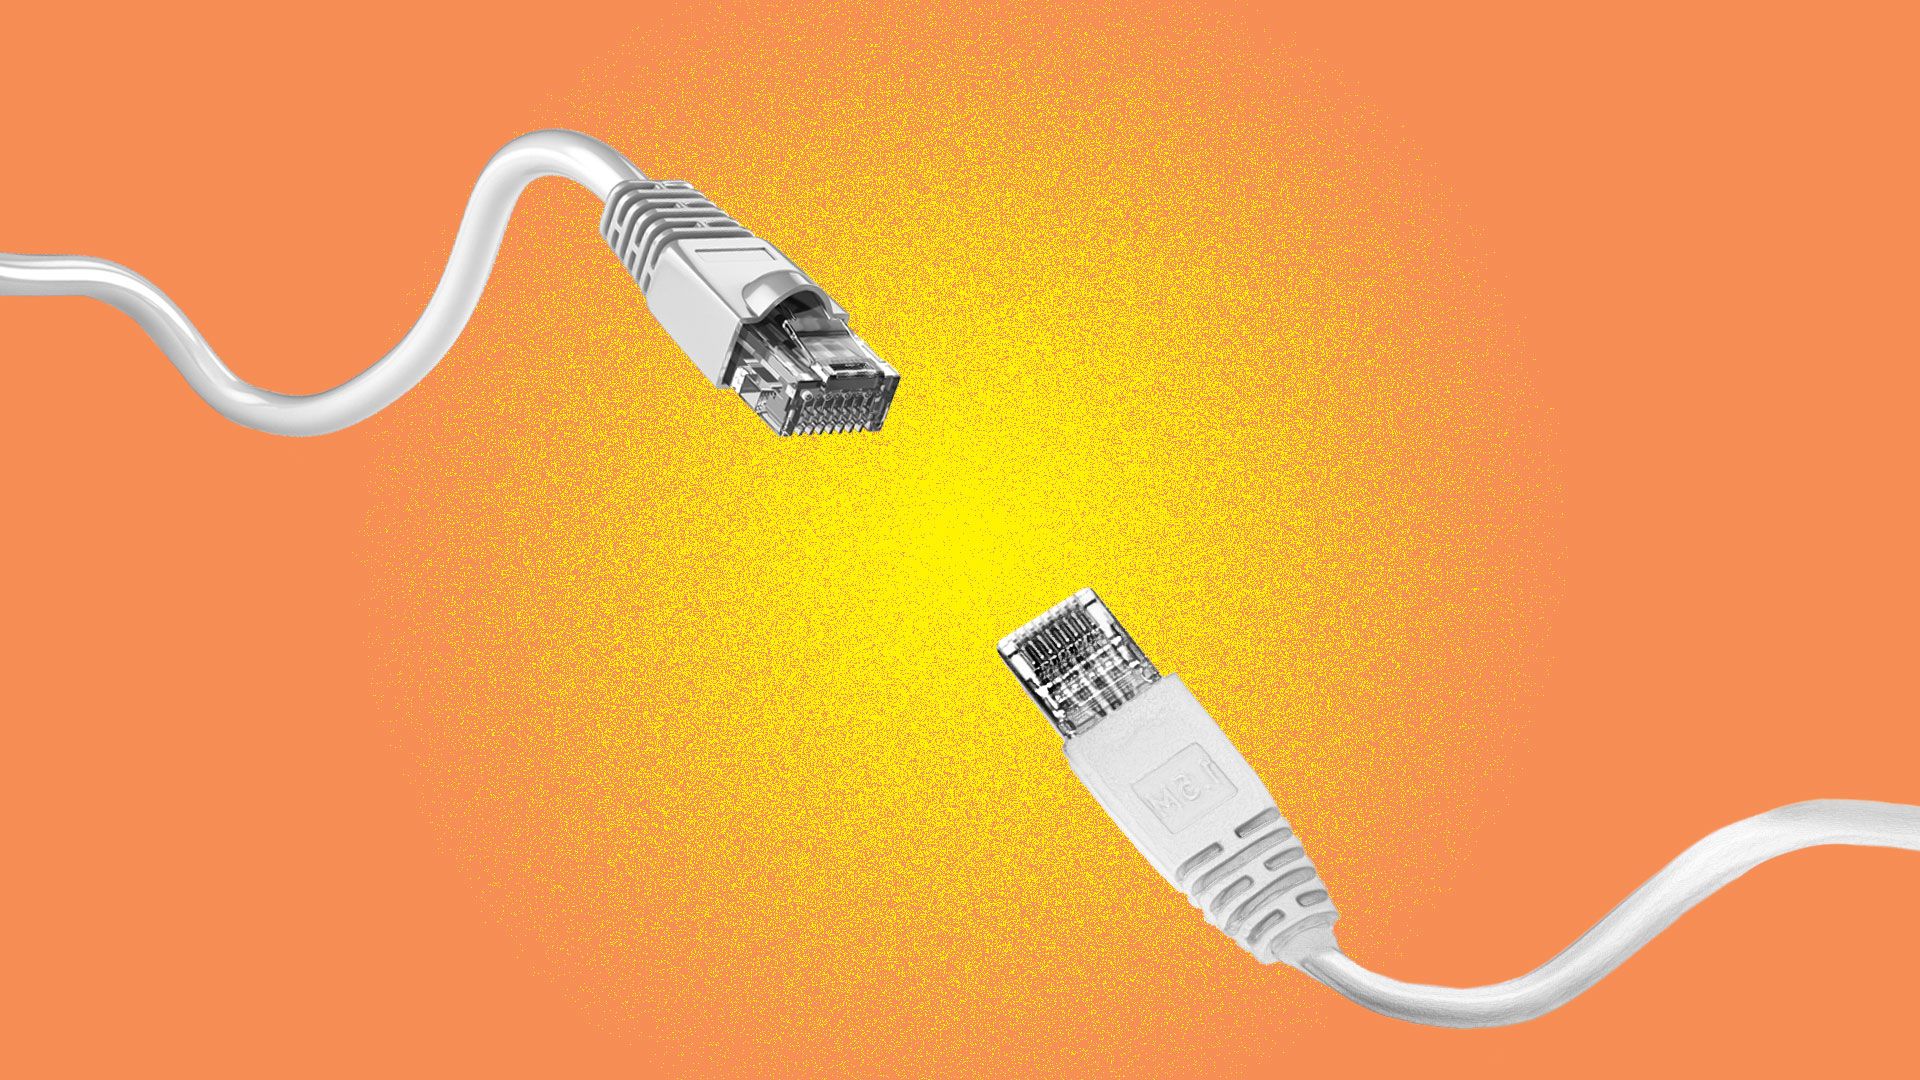 Illustration of two Ethernet cables